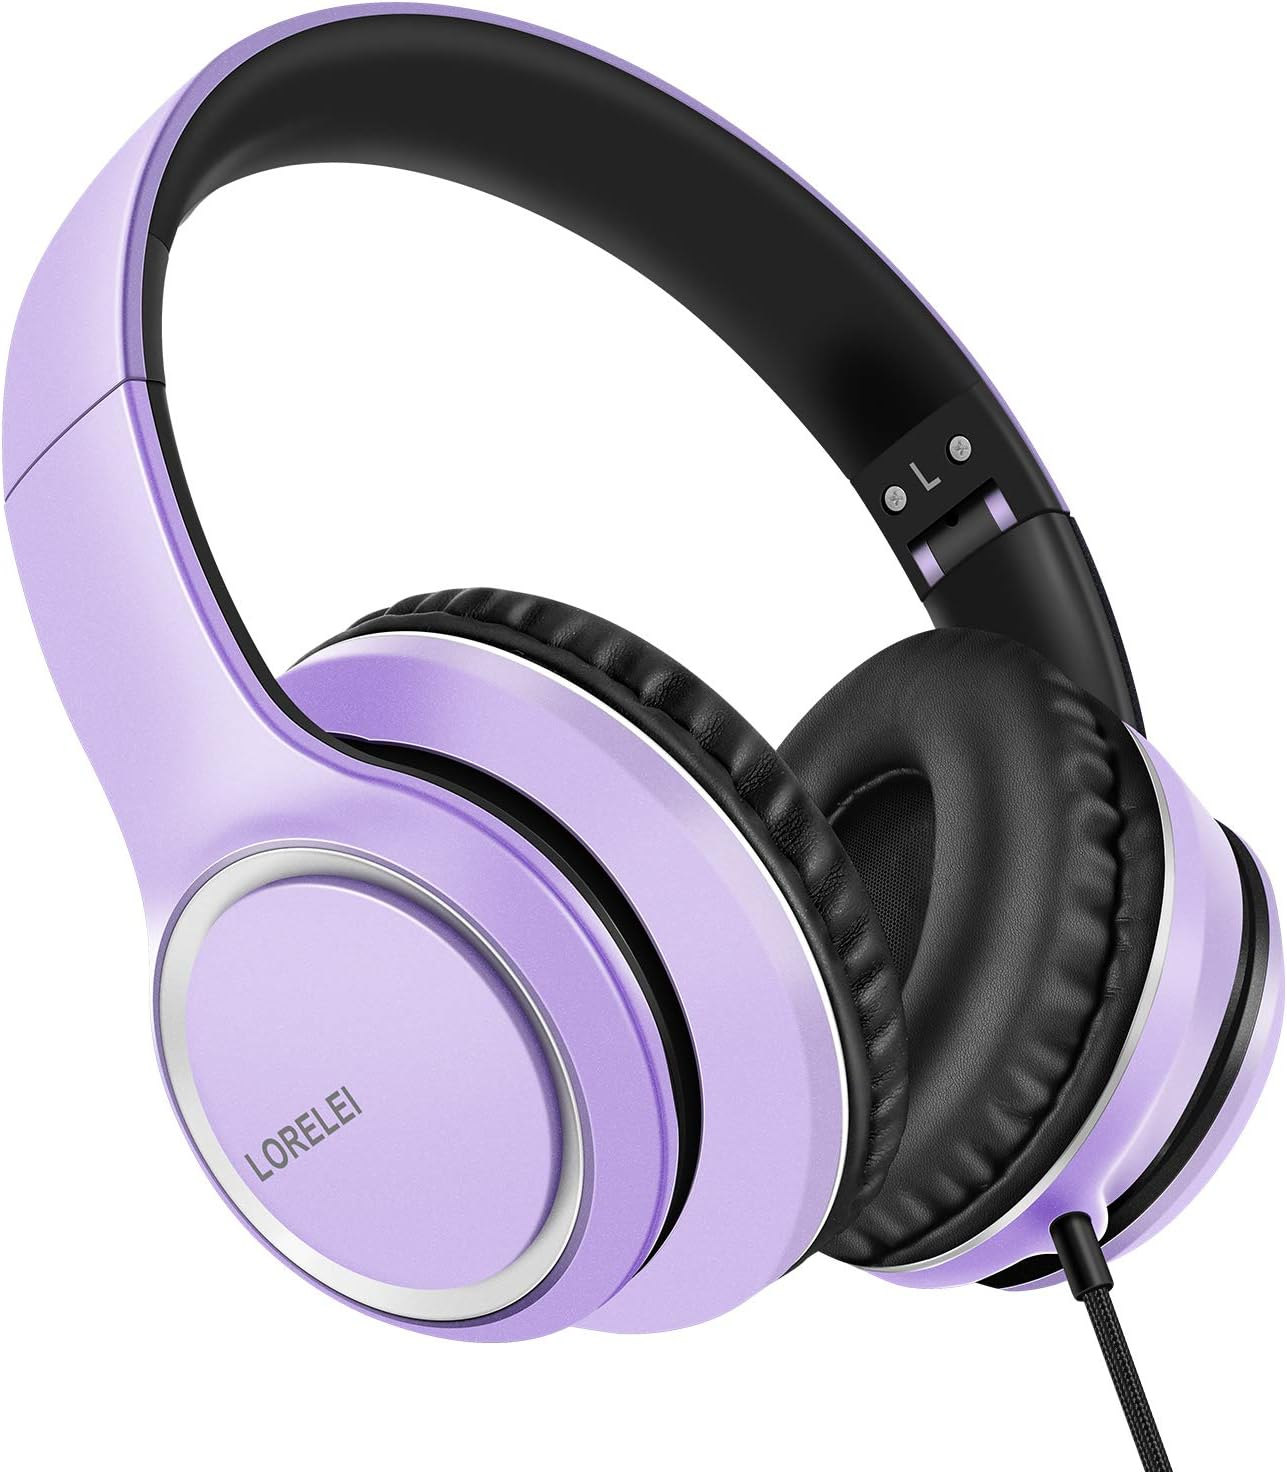 LORELEI X8 Over-Ear Wired Headphones with Microphone with 1.45m-Tangle-Free Nylon Line3.5mm Plug,Lightweight Foldable  Portable Headphones for Smartphone,Tablet,Computer,Mp3/4(Dark Purple)